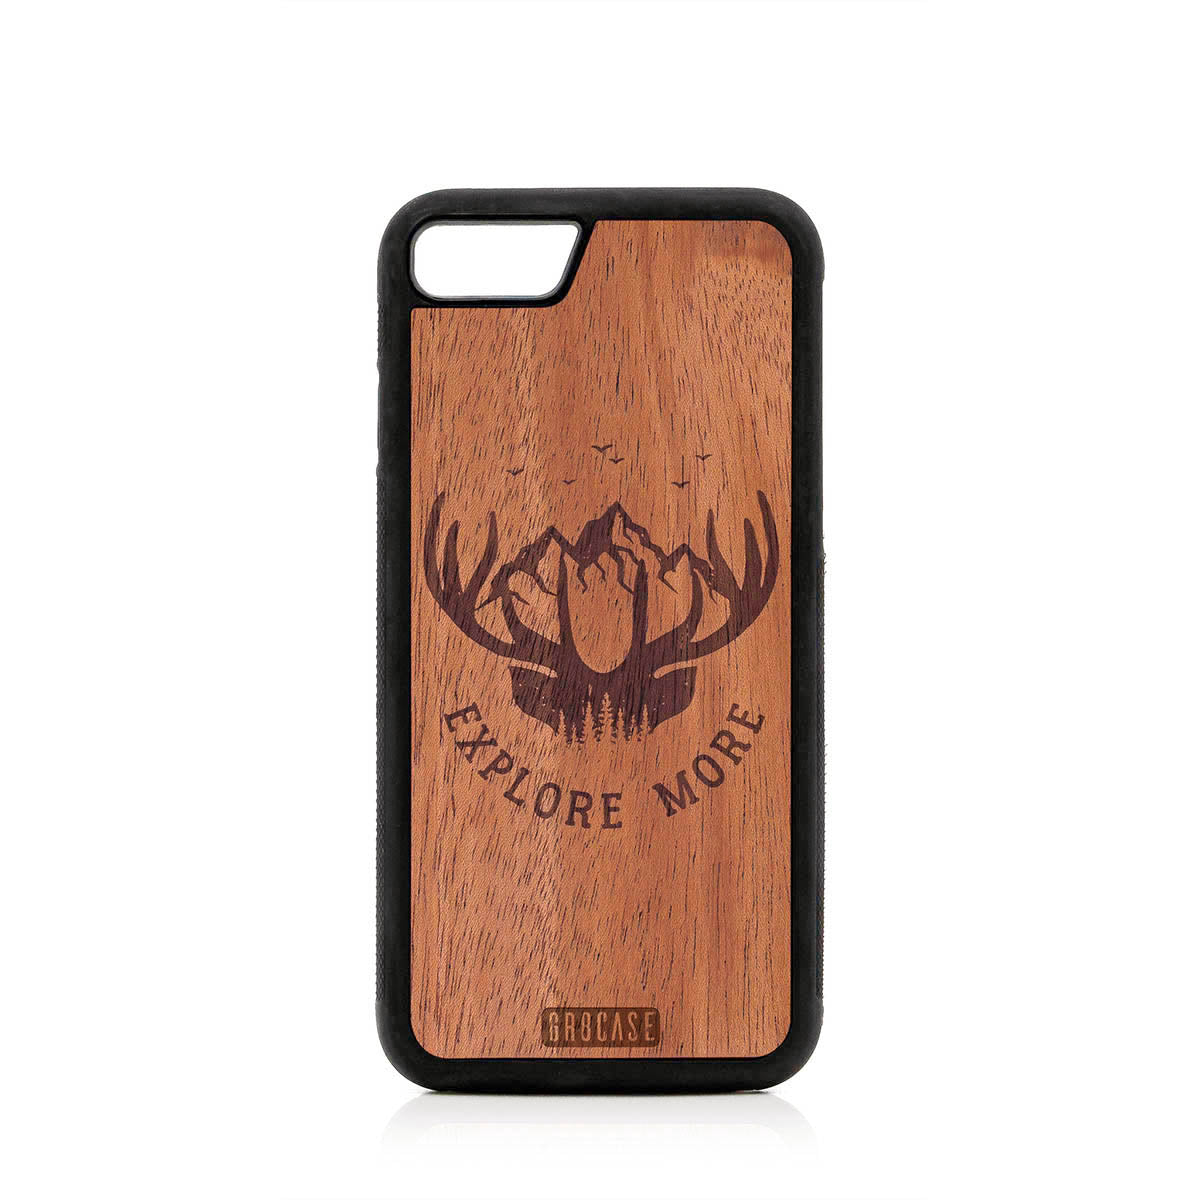 Explore More (Forest, Mountains & Antlers) Design Wood Case For iPhone SE 2020 by GR8CASE